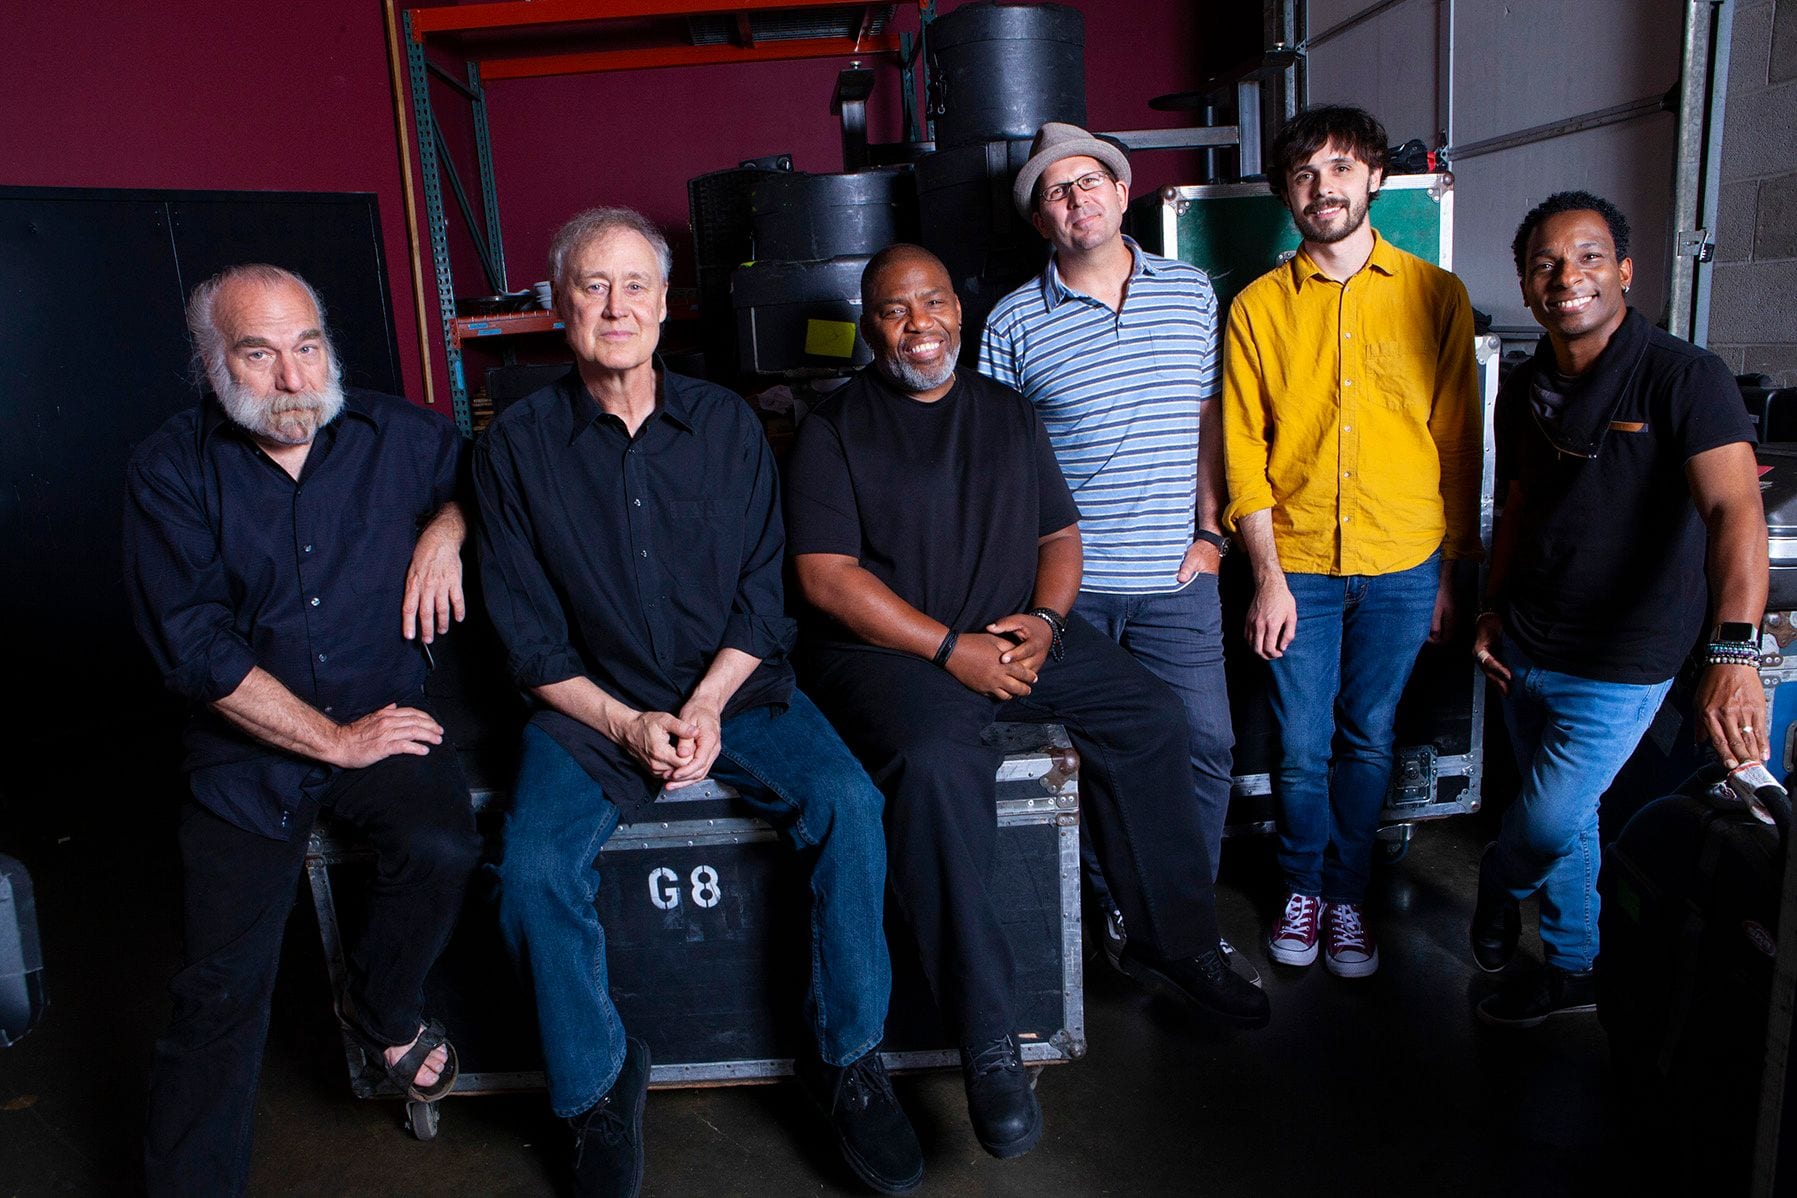 With Musical Range and Noisemaking, Bruce Hornsby Takes San Francisco